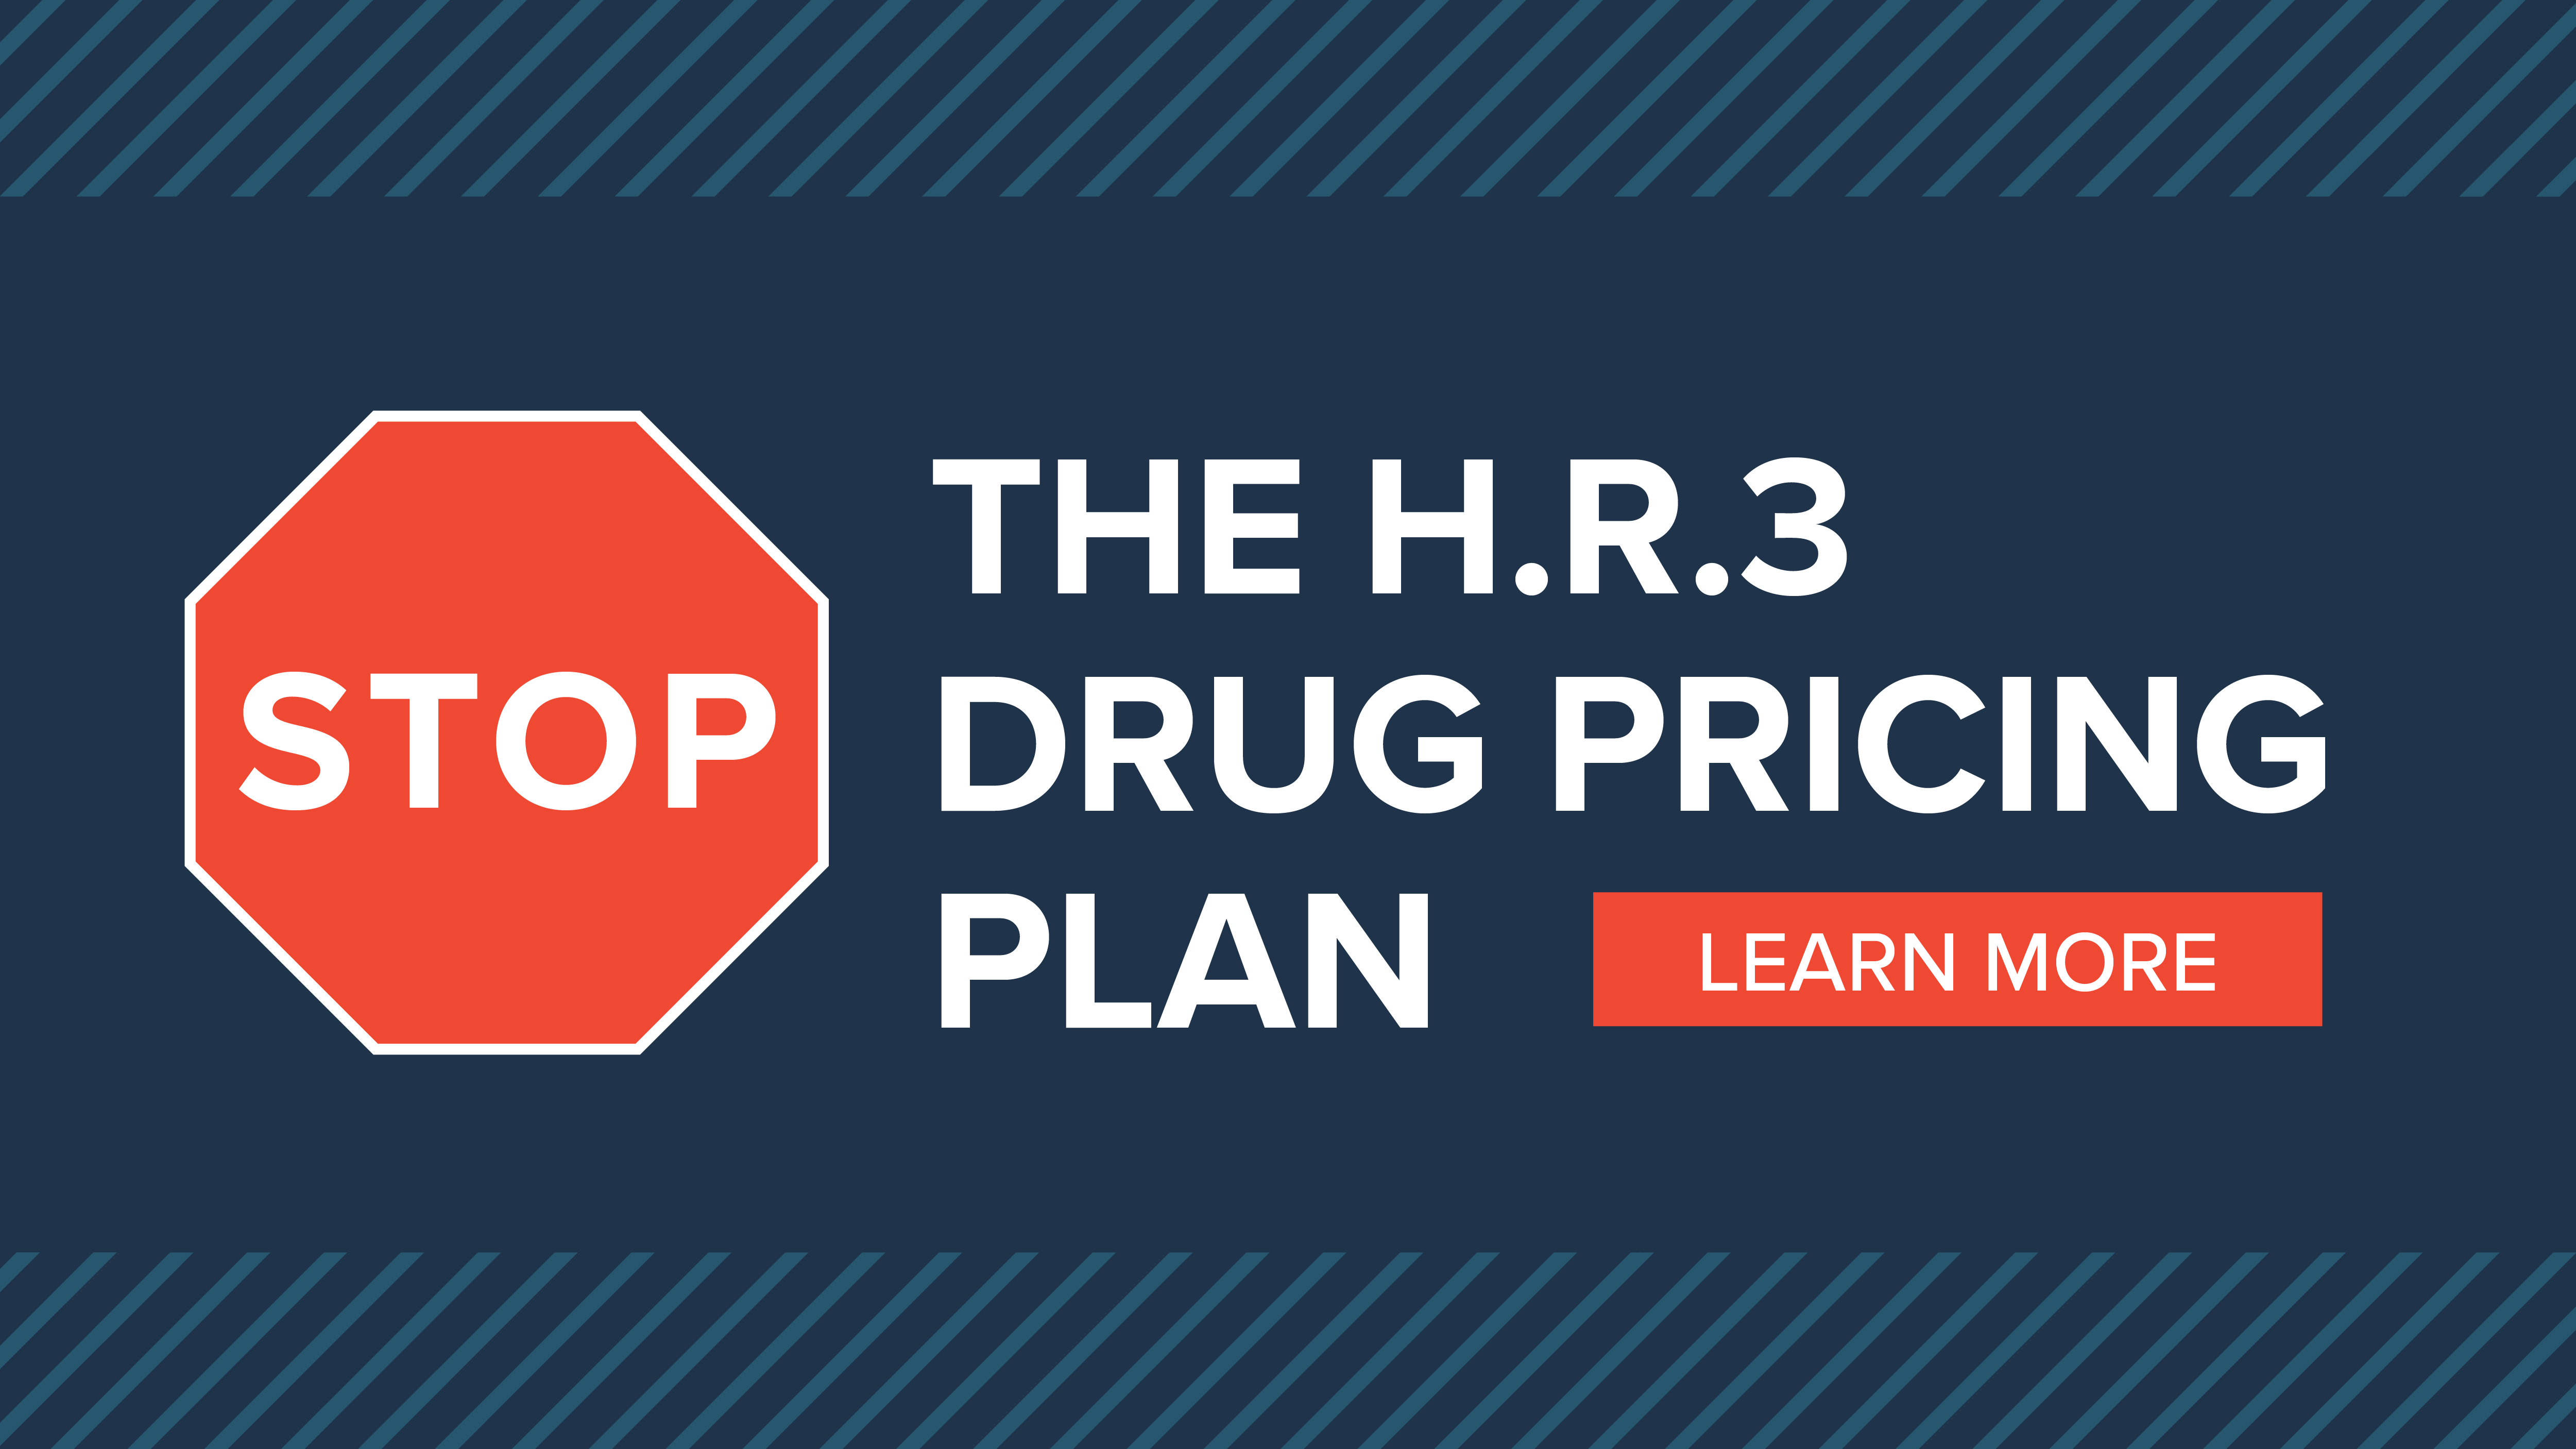 H.R. 3 threatens access to medicines, future innovation and American jobs